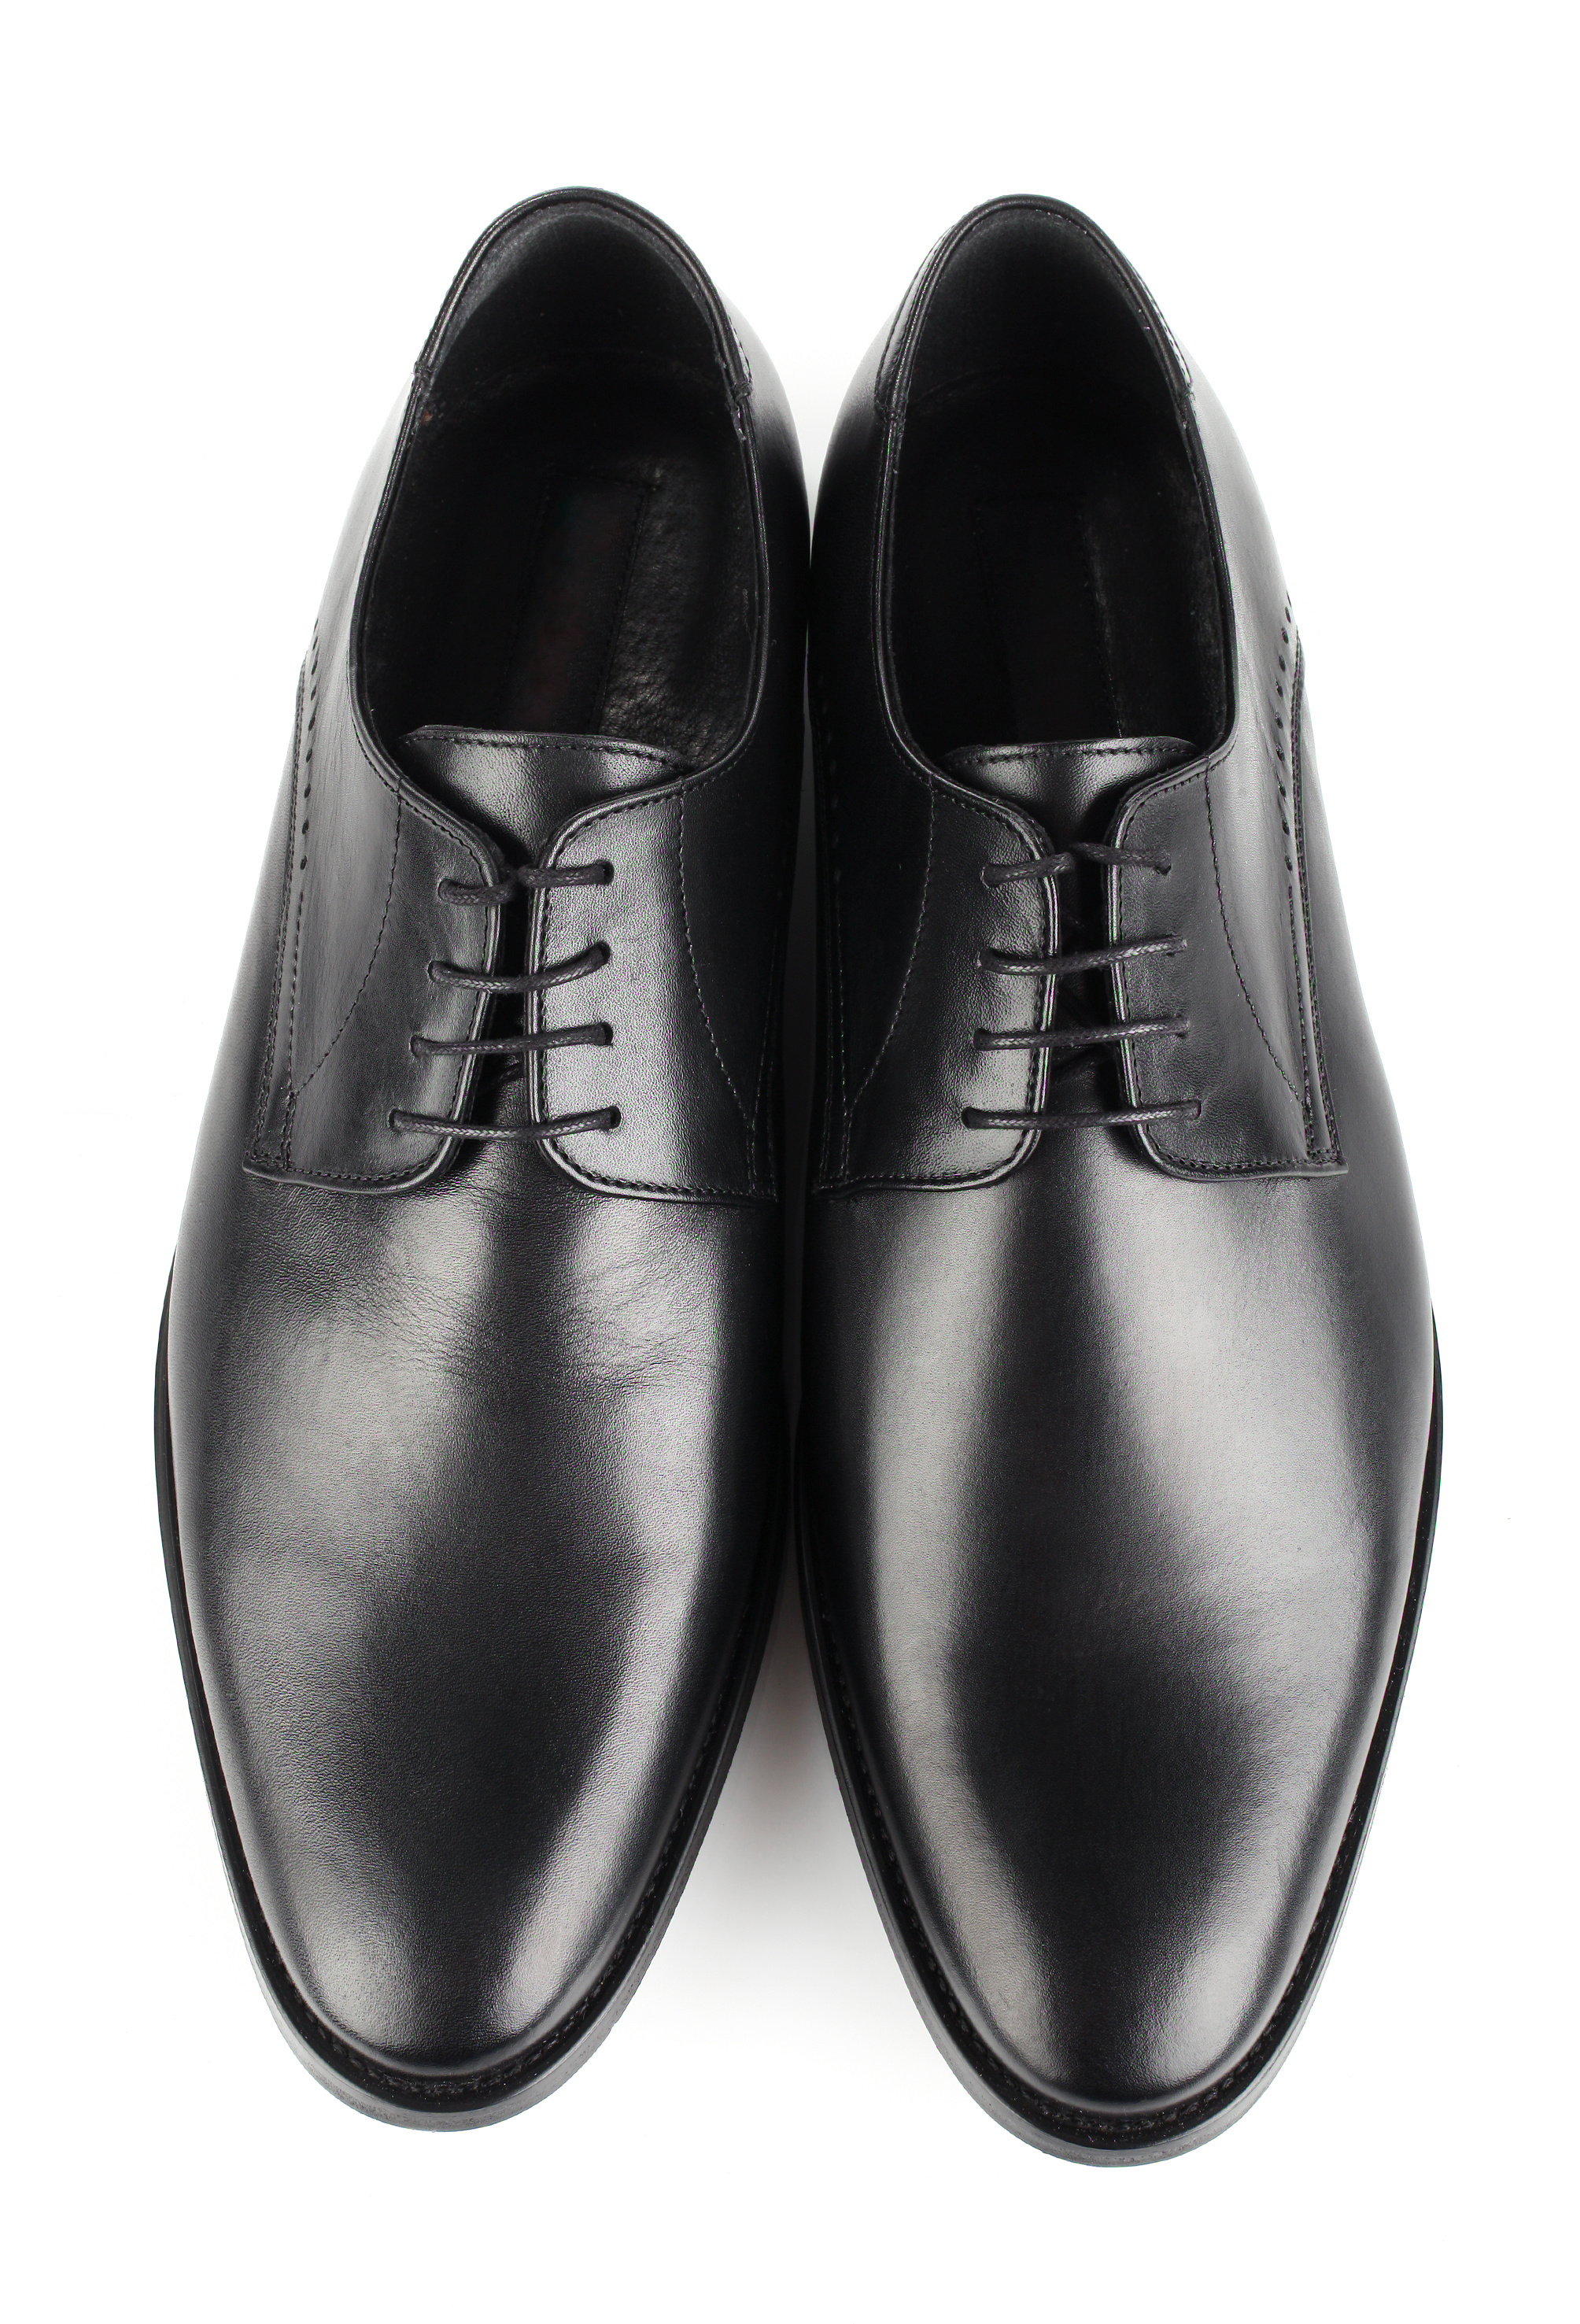 Classic black leather mens shoes with laces isolated on white background top view